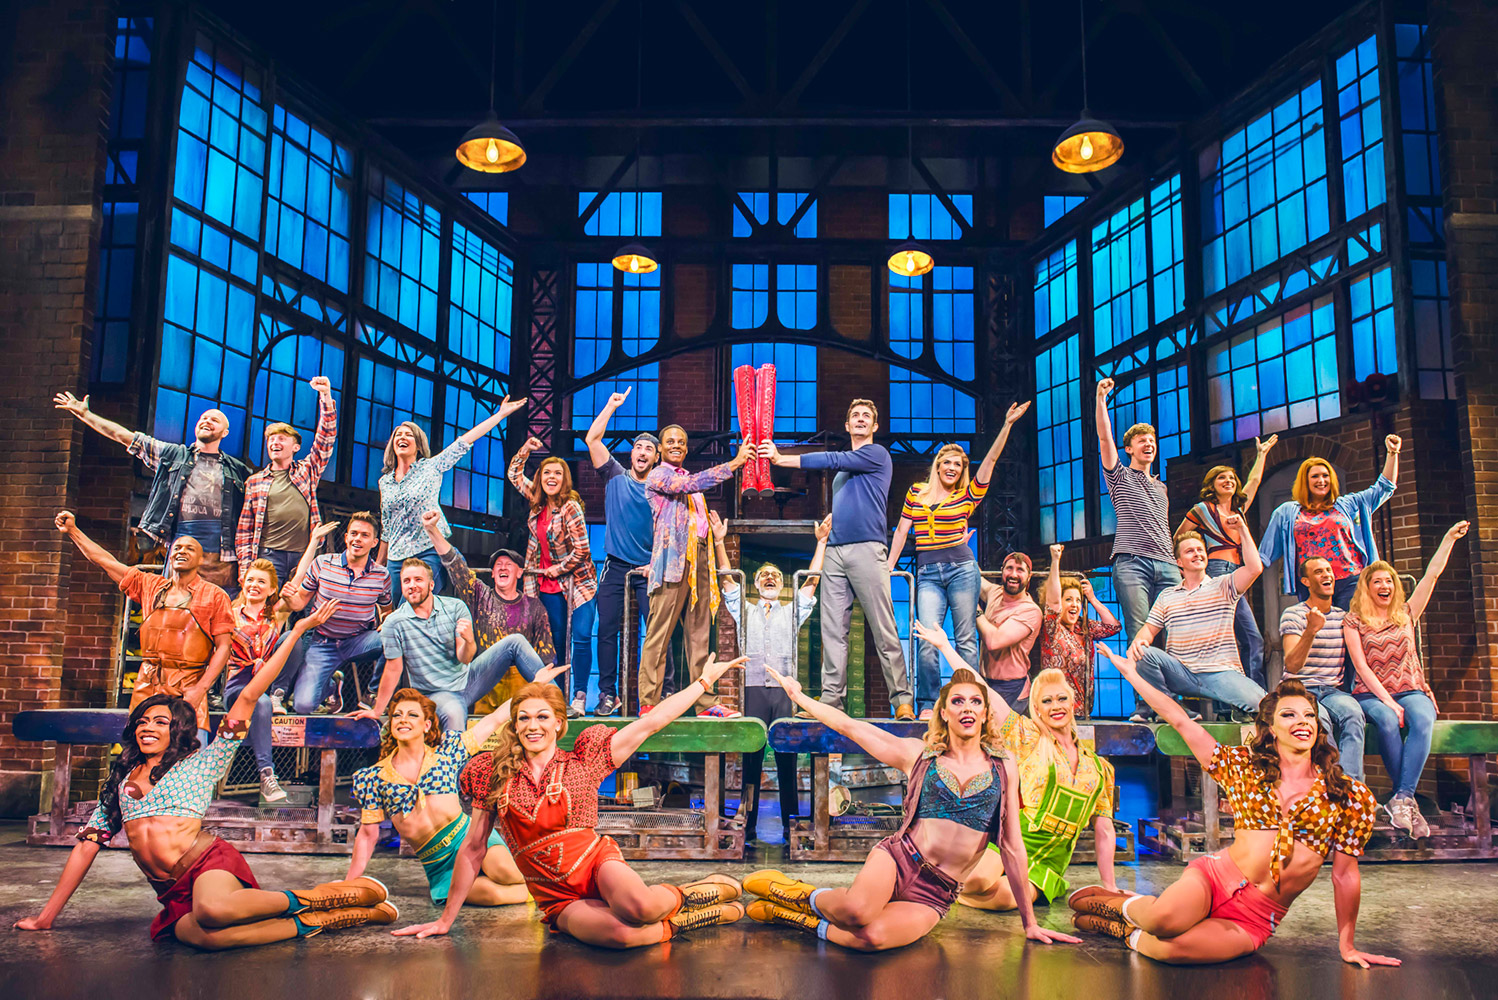 The hugely successful Kinky Boots won an Olivier Award in 2016 for Best New Musical.